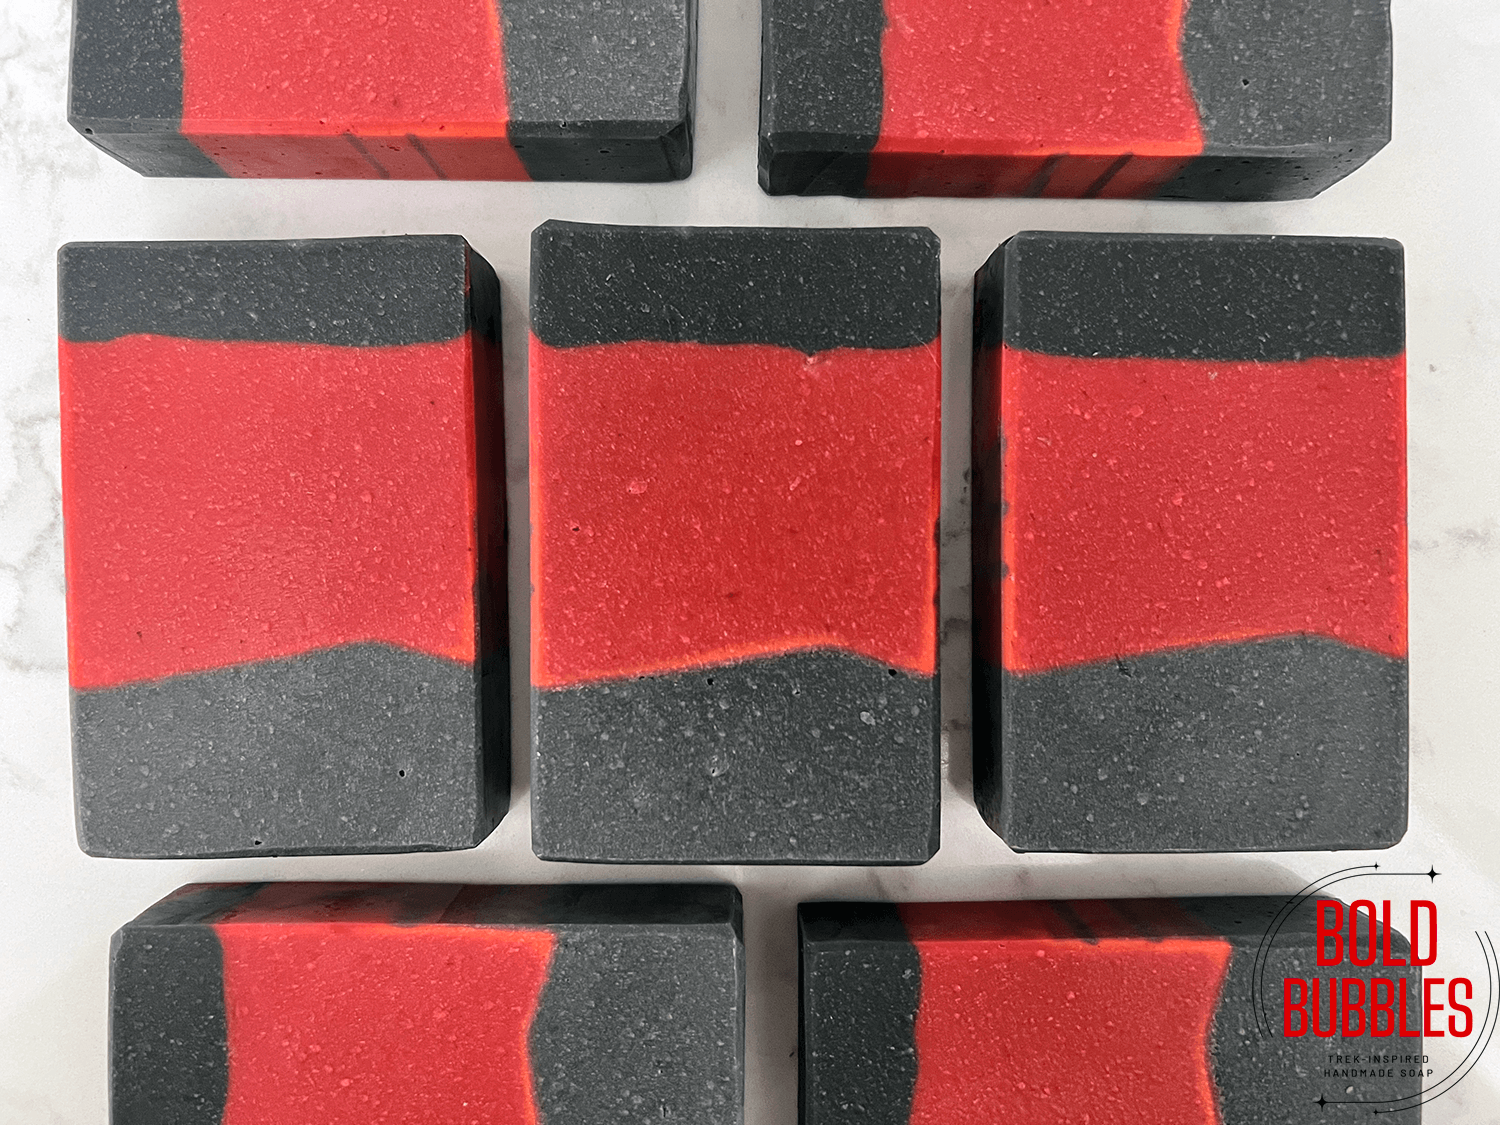 A red and black bar of soap inspired by Commander Riker from Star Trek: The Next Generation.